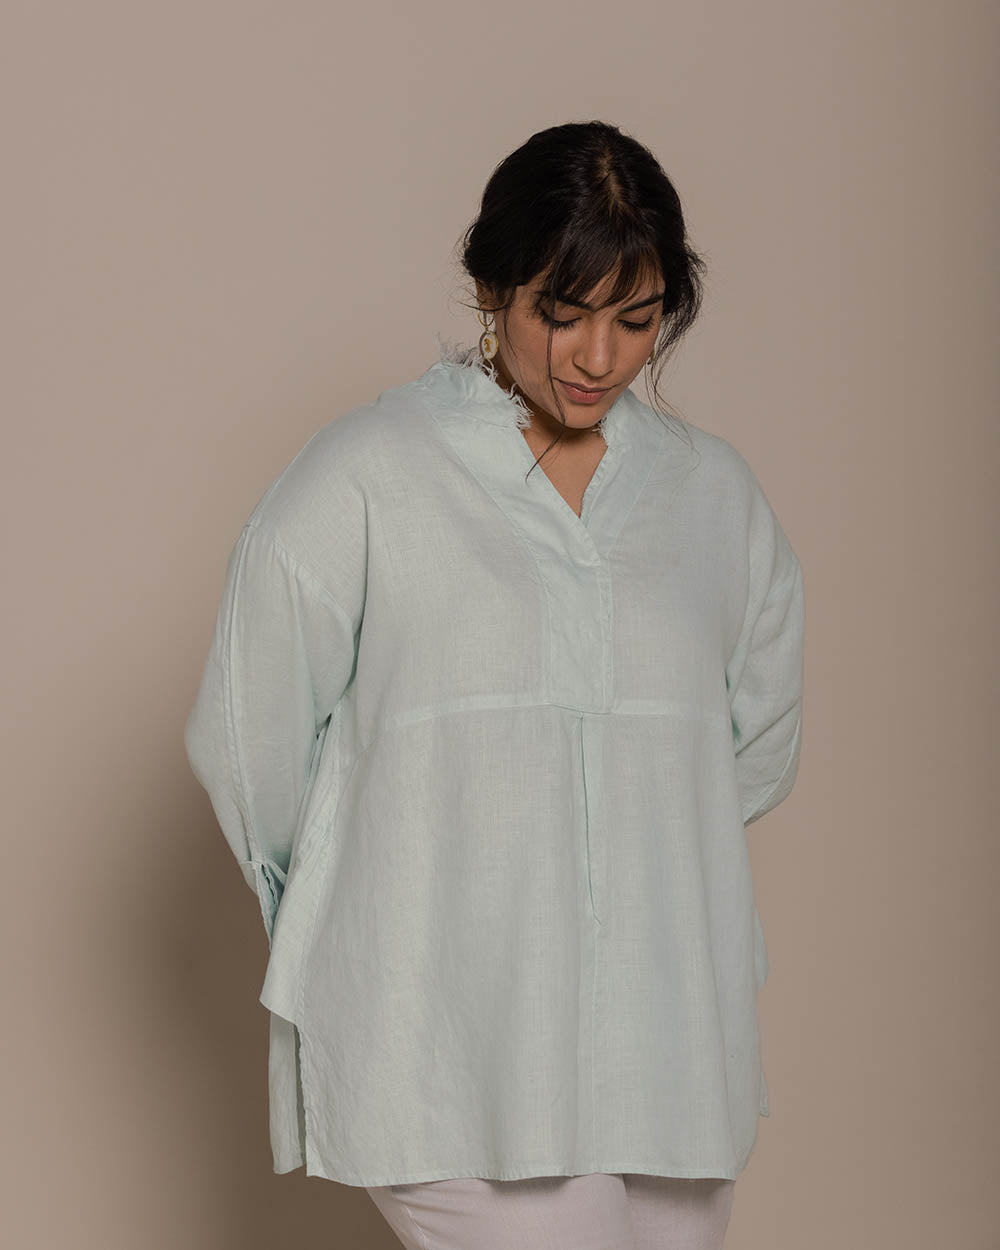 Women Are From Venus Shirt - Sage Mint at Kamakhyaa by Reistor. This item is Casual Wear, Green, Hemp, Natural, Solids, T-Shirts, Tops, Tunic Tops, Womenswear